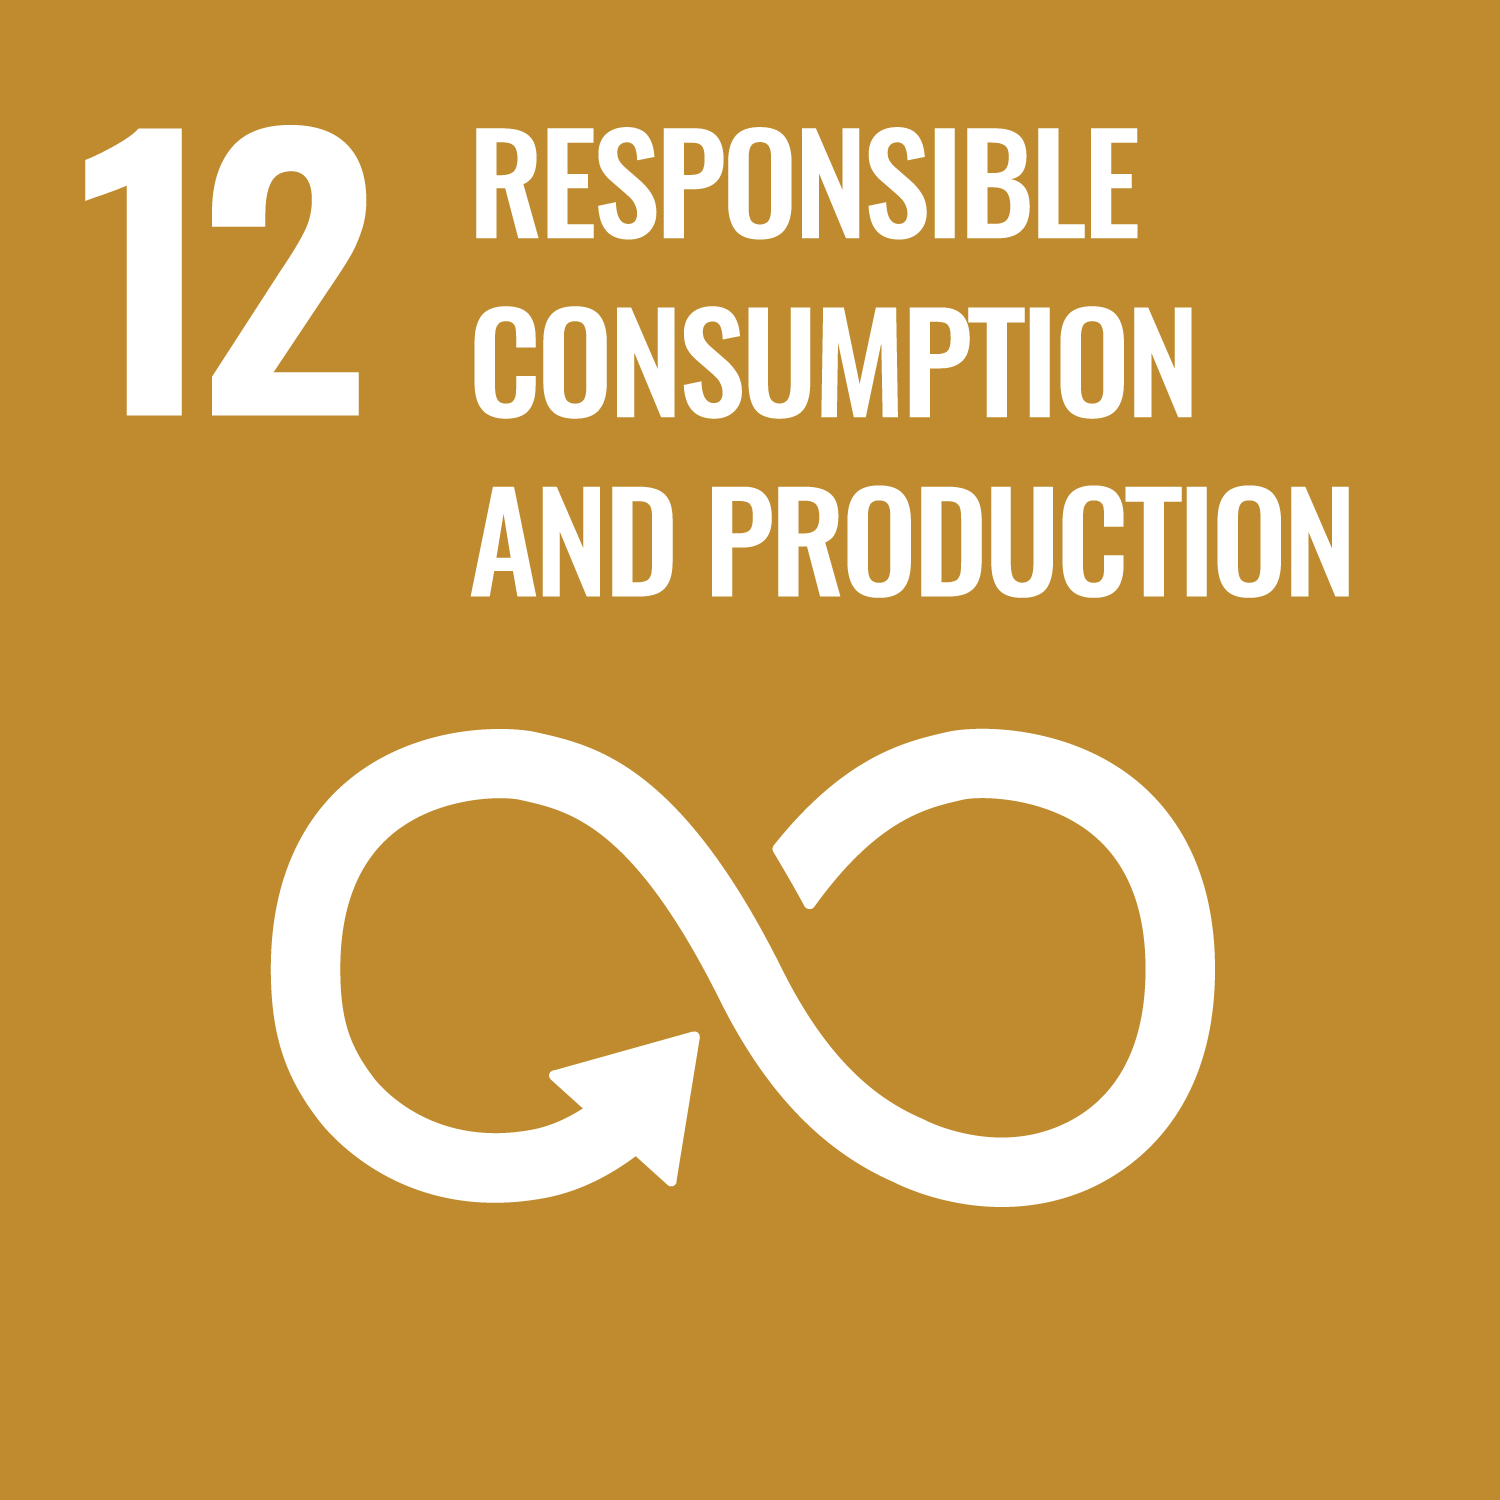 SDGs 責任消費及生產-Responsible Consumption and Production圖示